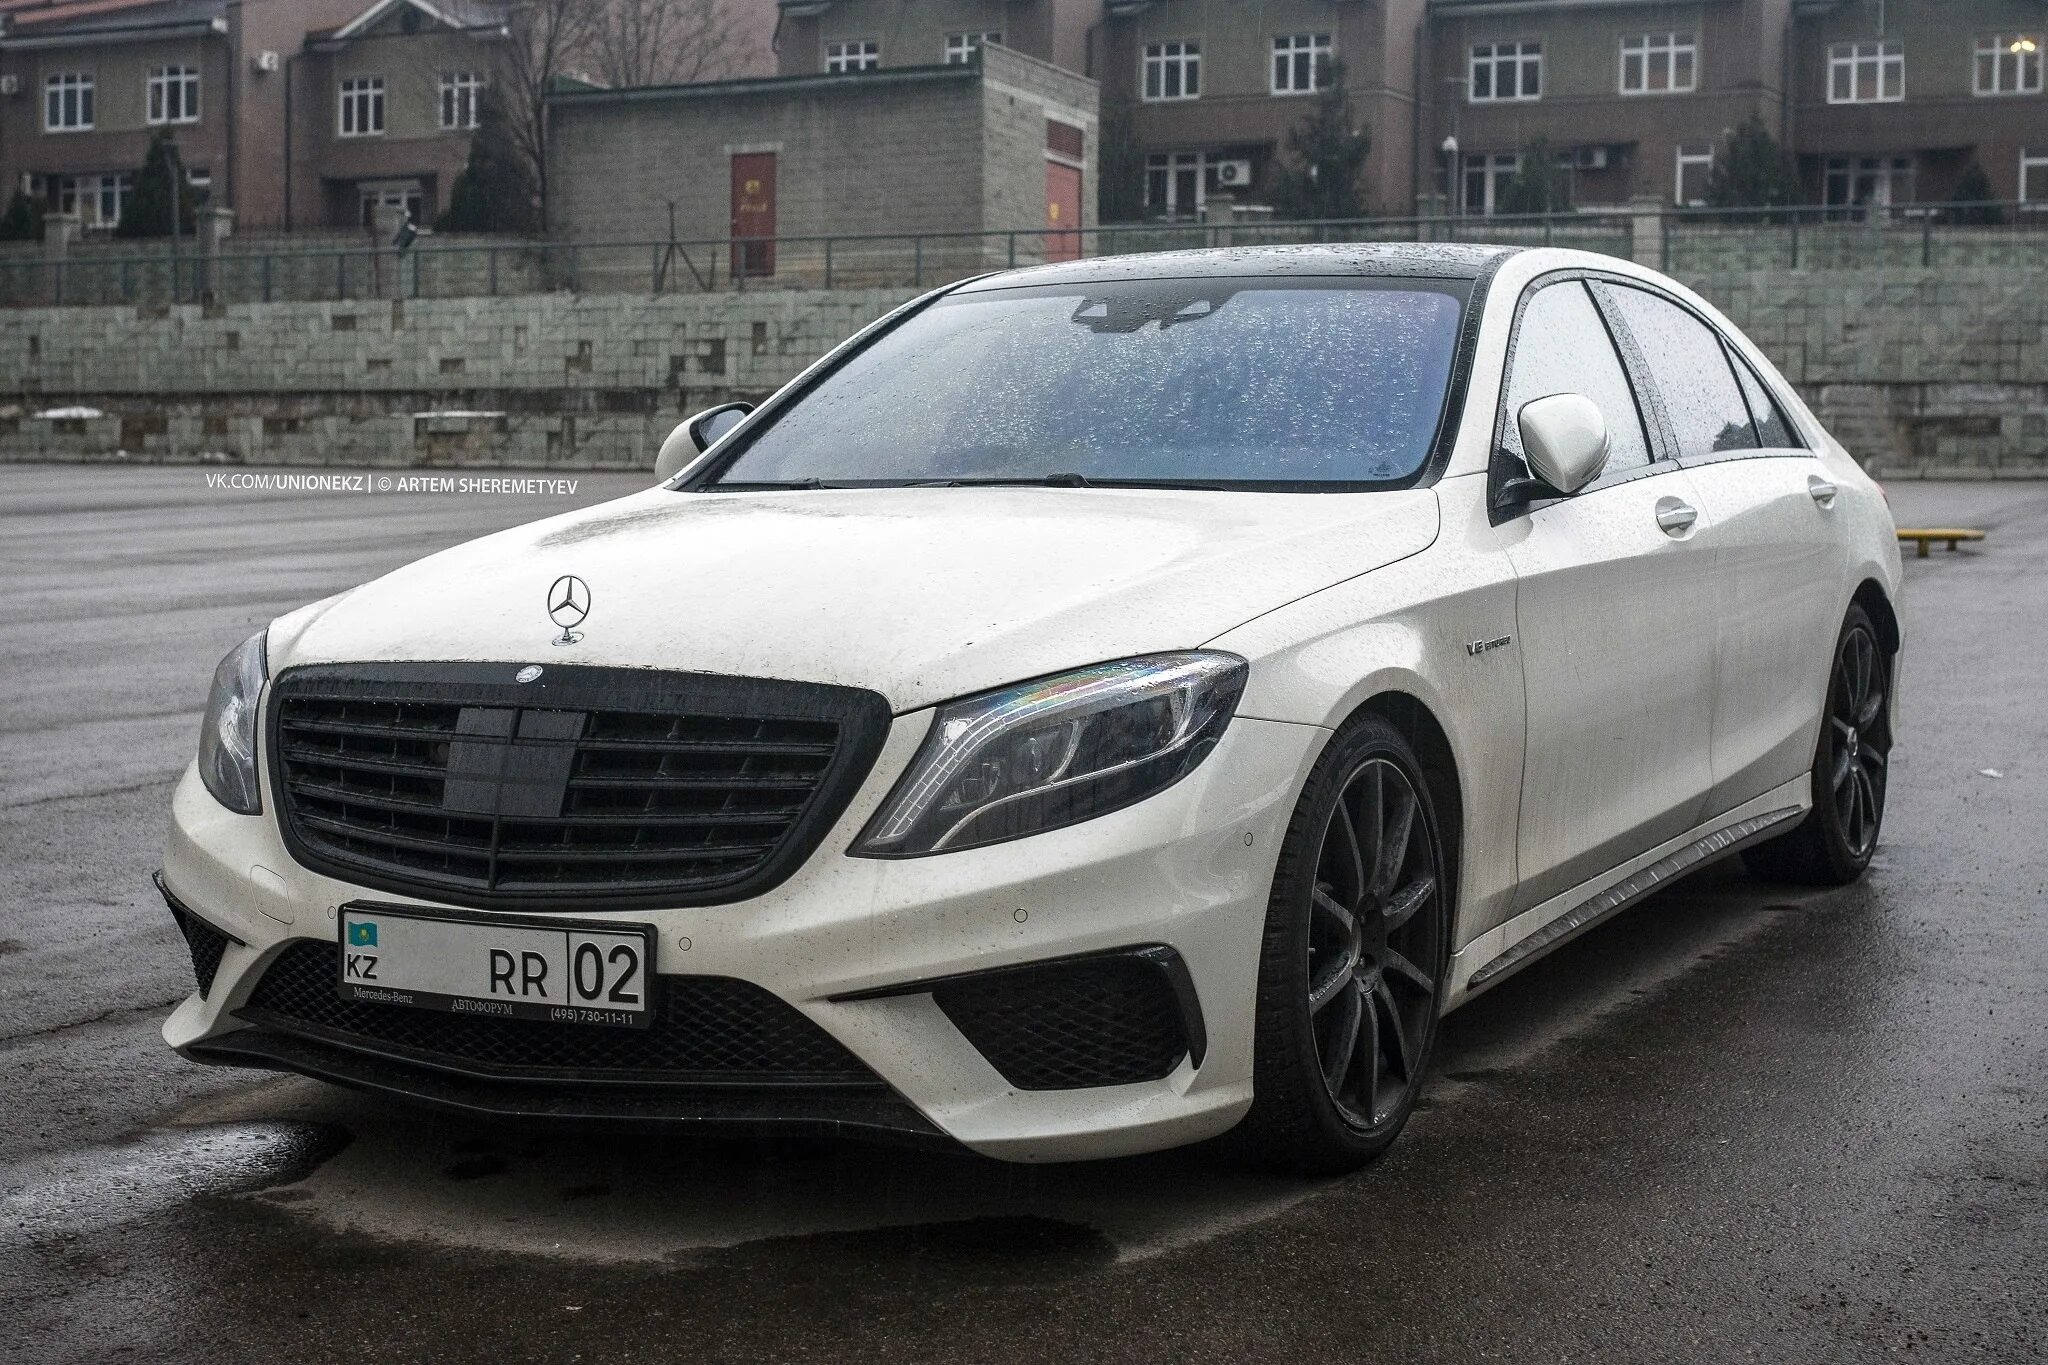 S500 w222. Мерседес е222. Mercedes Benz s500 w222. Mercedes Benz 222. Мерседес 222.